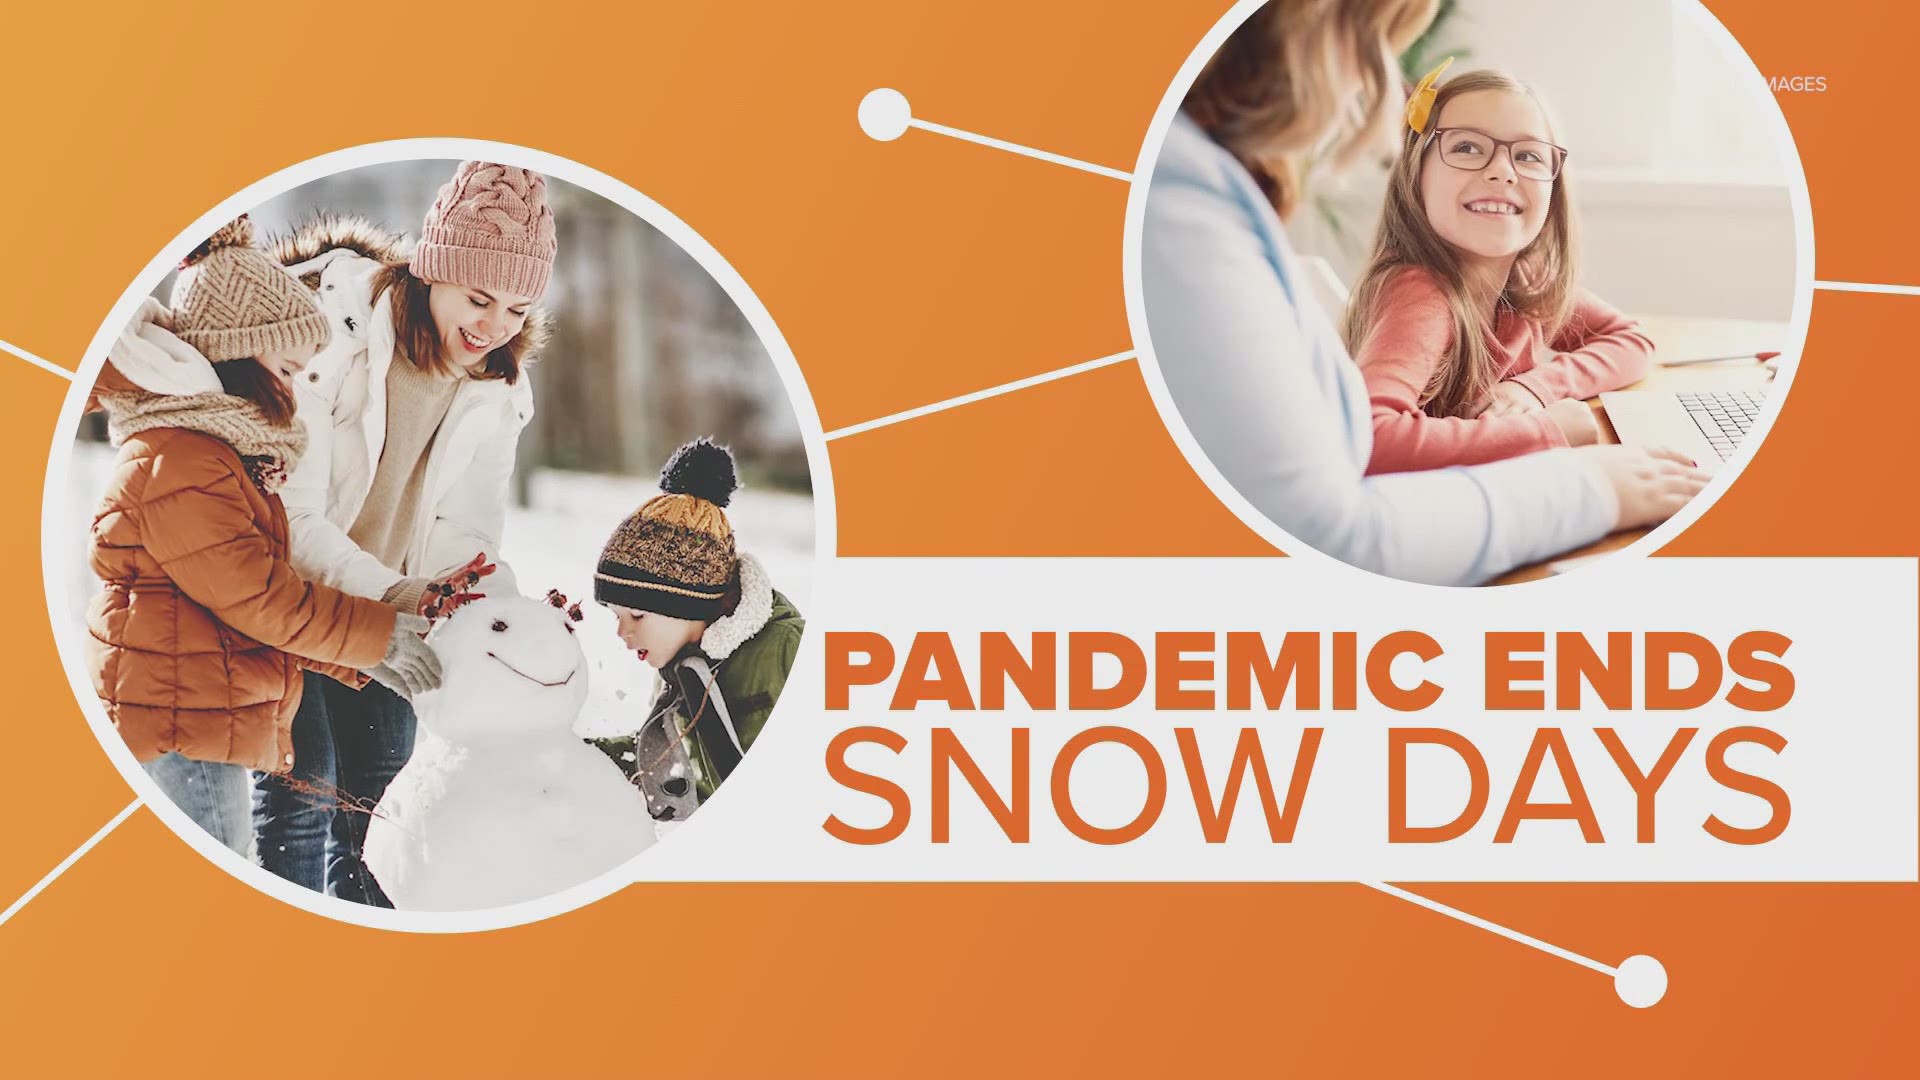 We were warned it could happen but it does look like the coronavirus pandemic has killed snow days for kids.